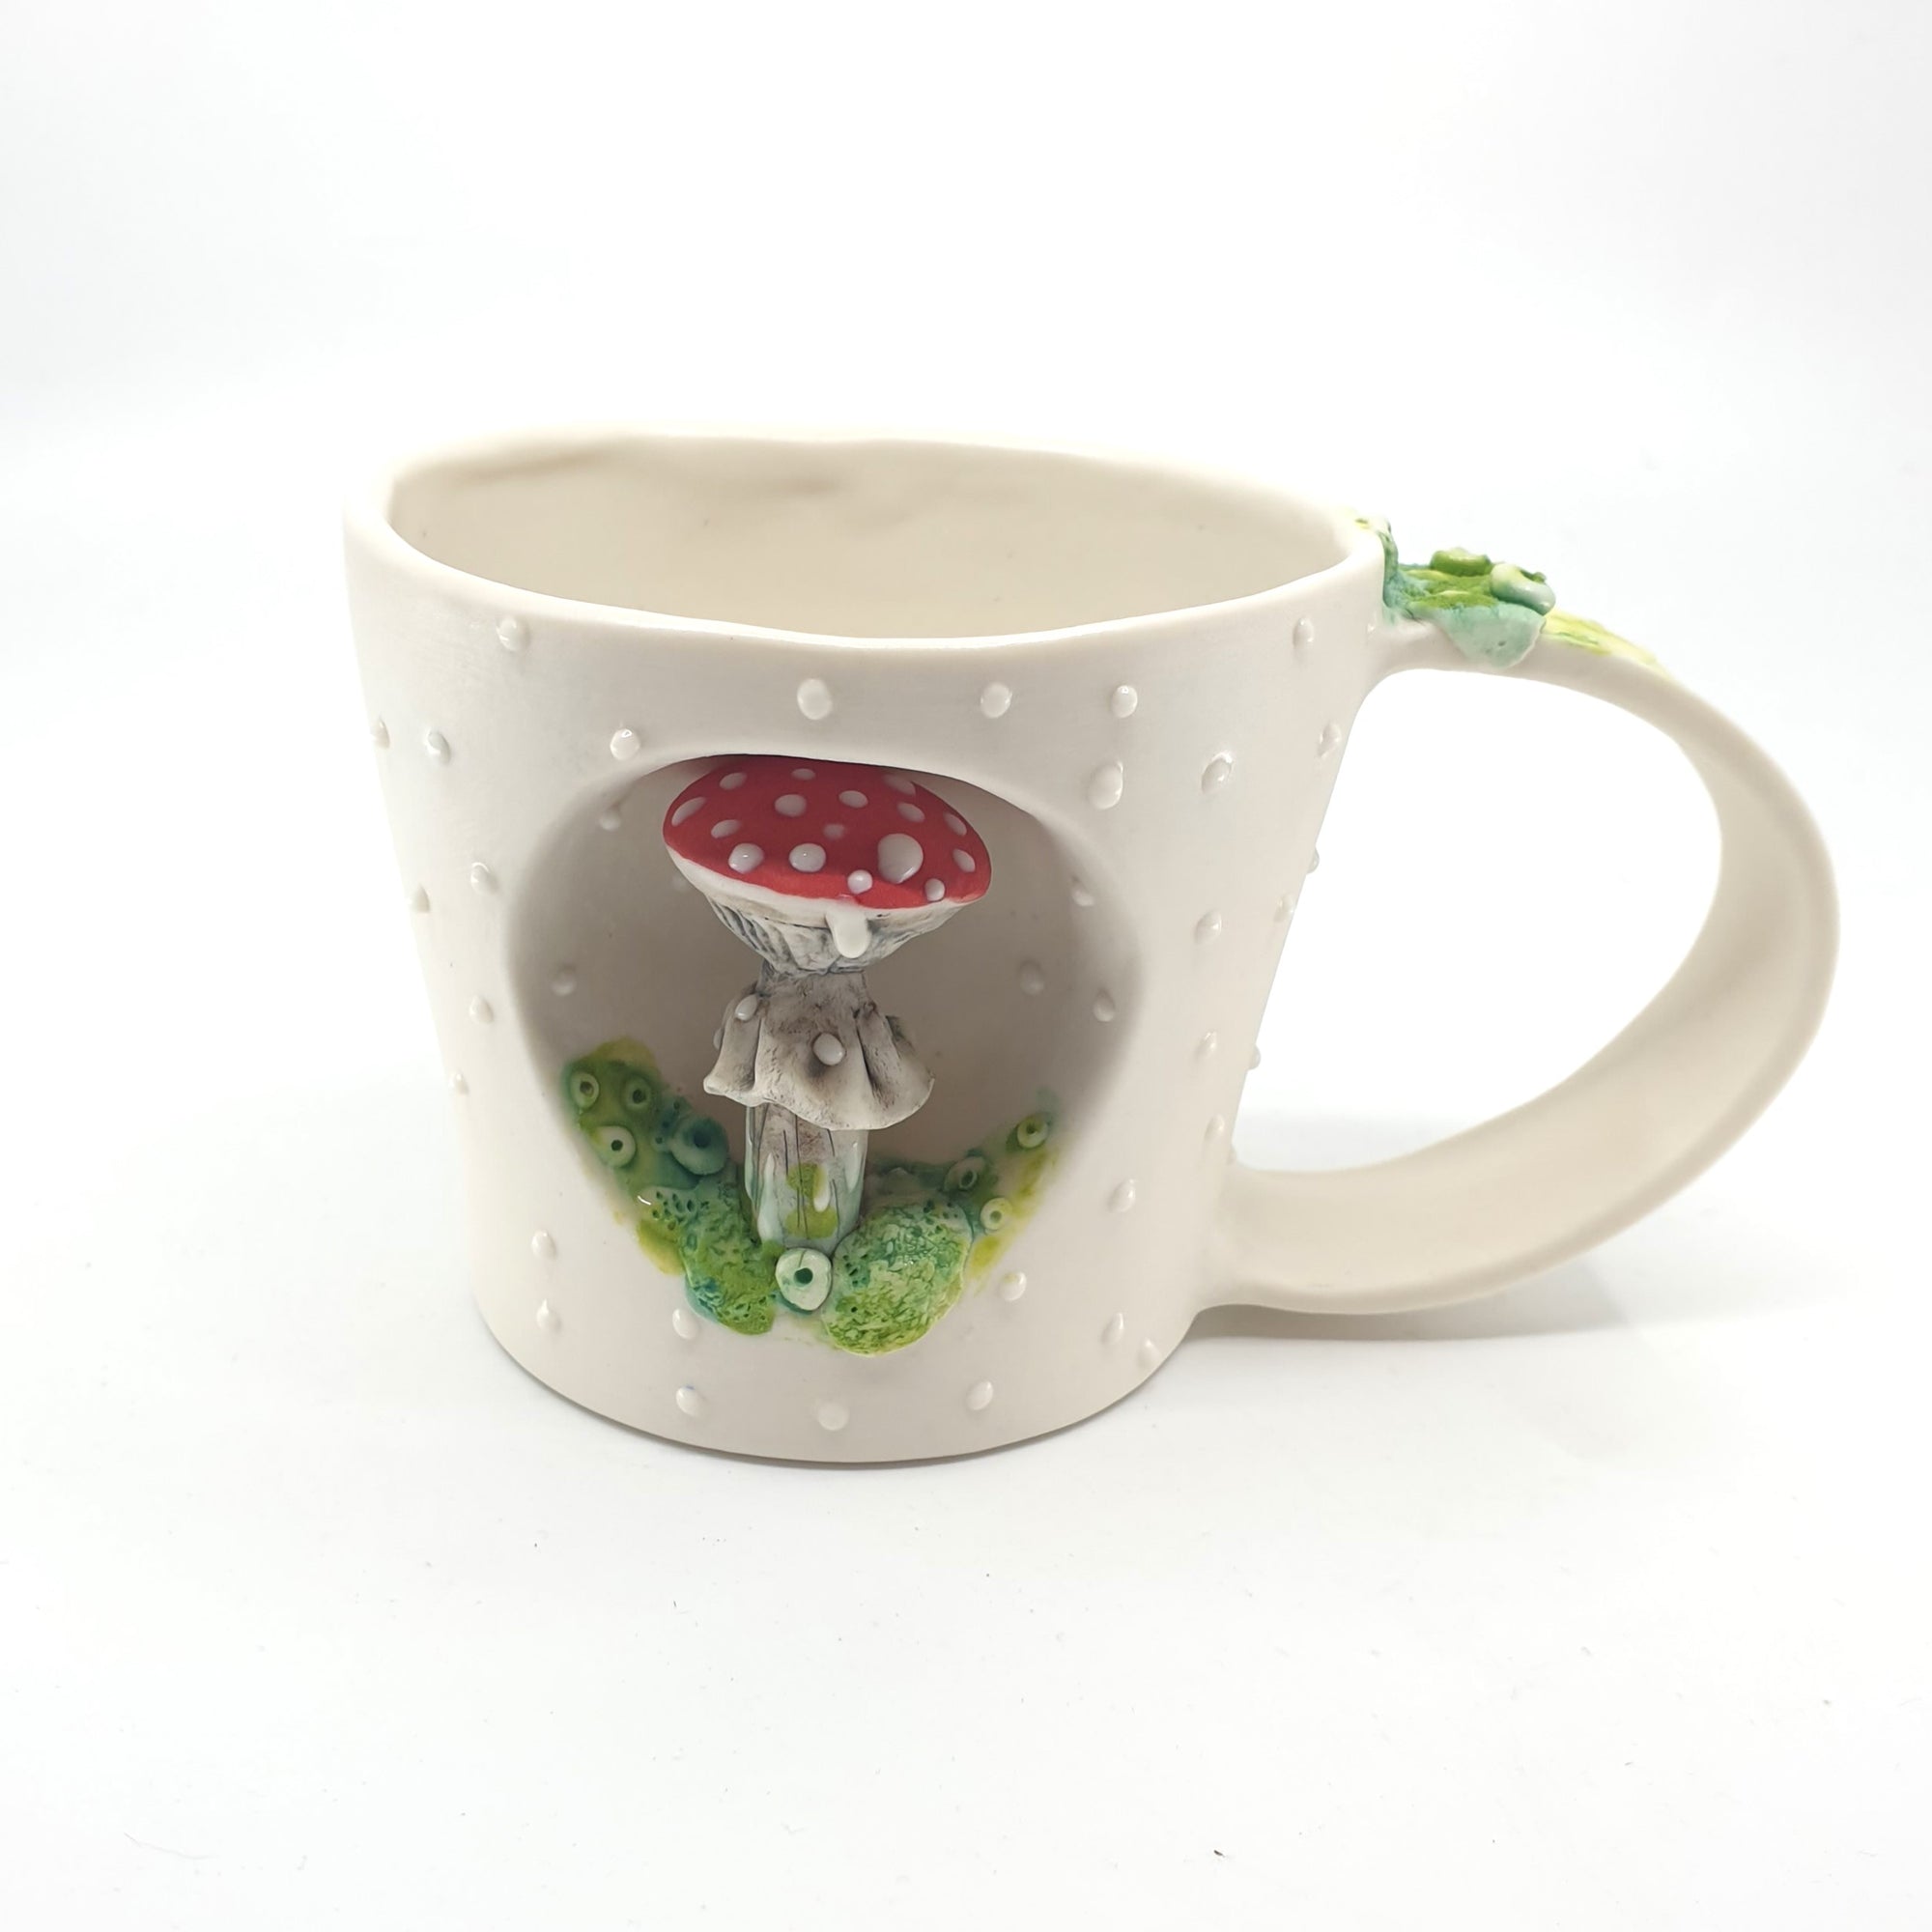 Porcelain cup with red mushroom